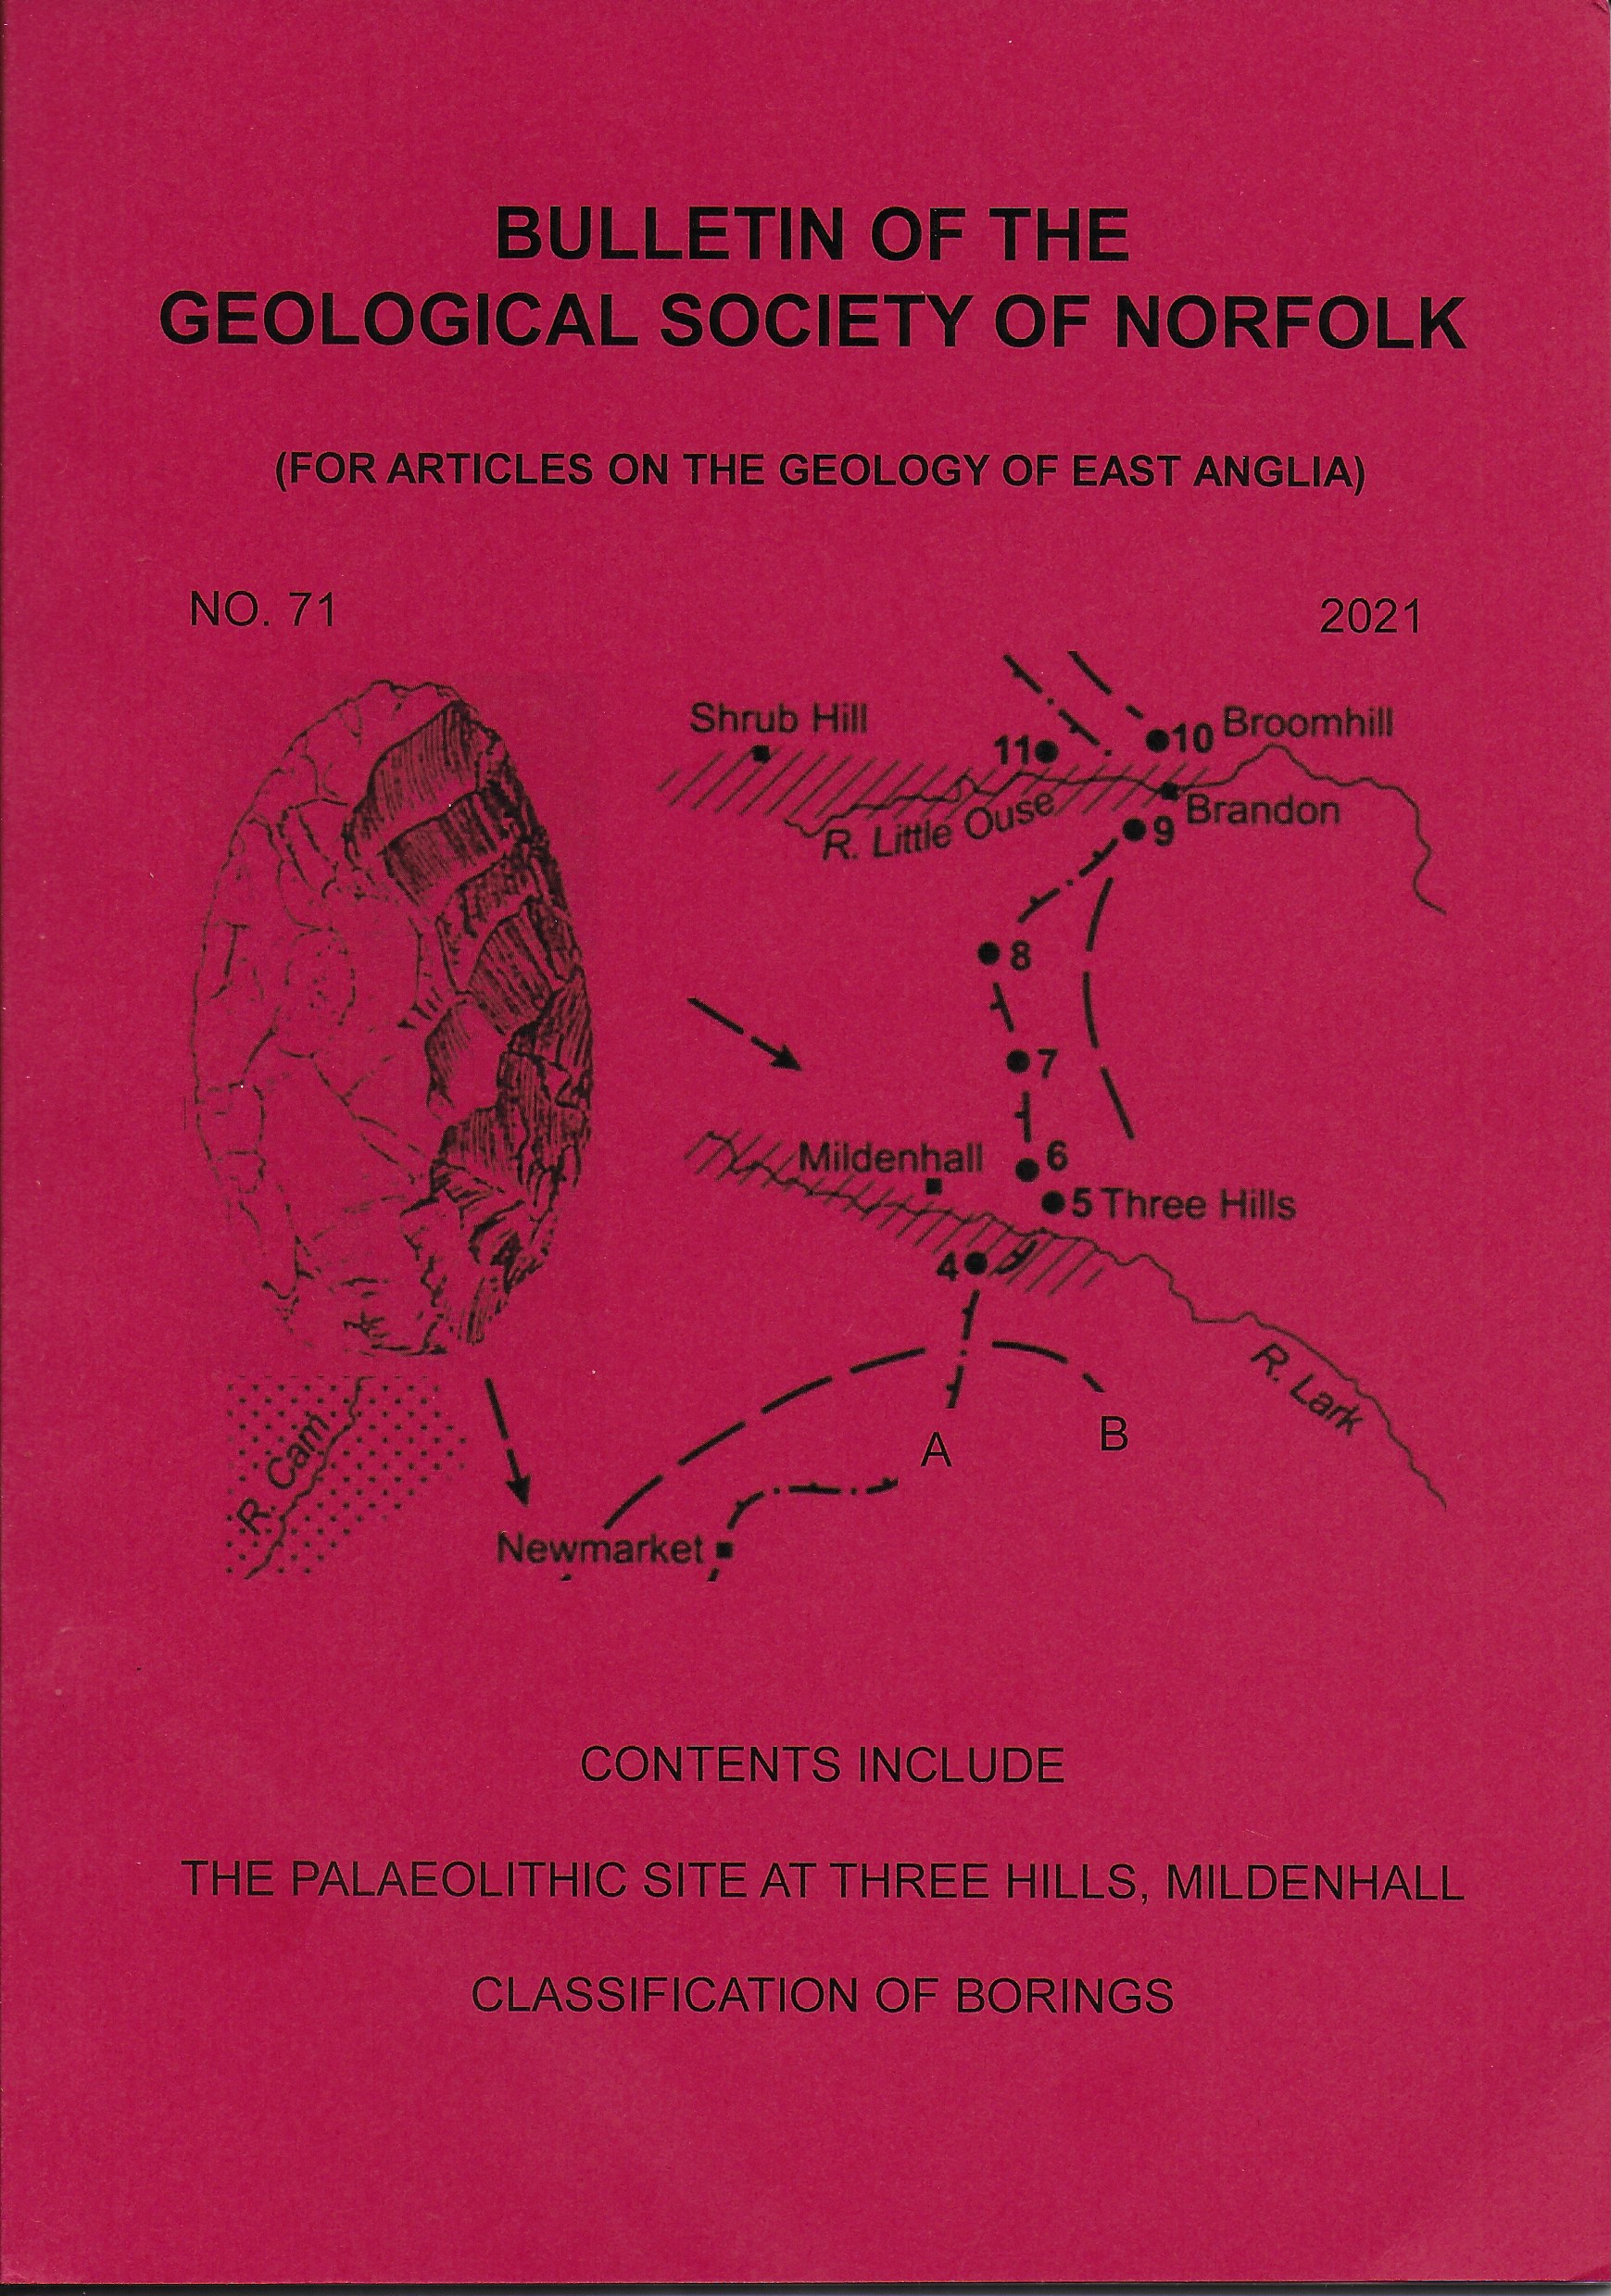 Bulletin of the Geological Society of Norfolk. - No. 71 (2021)